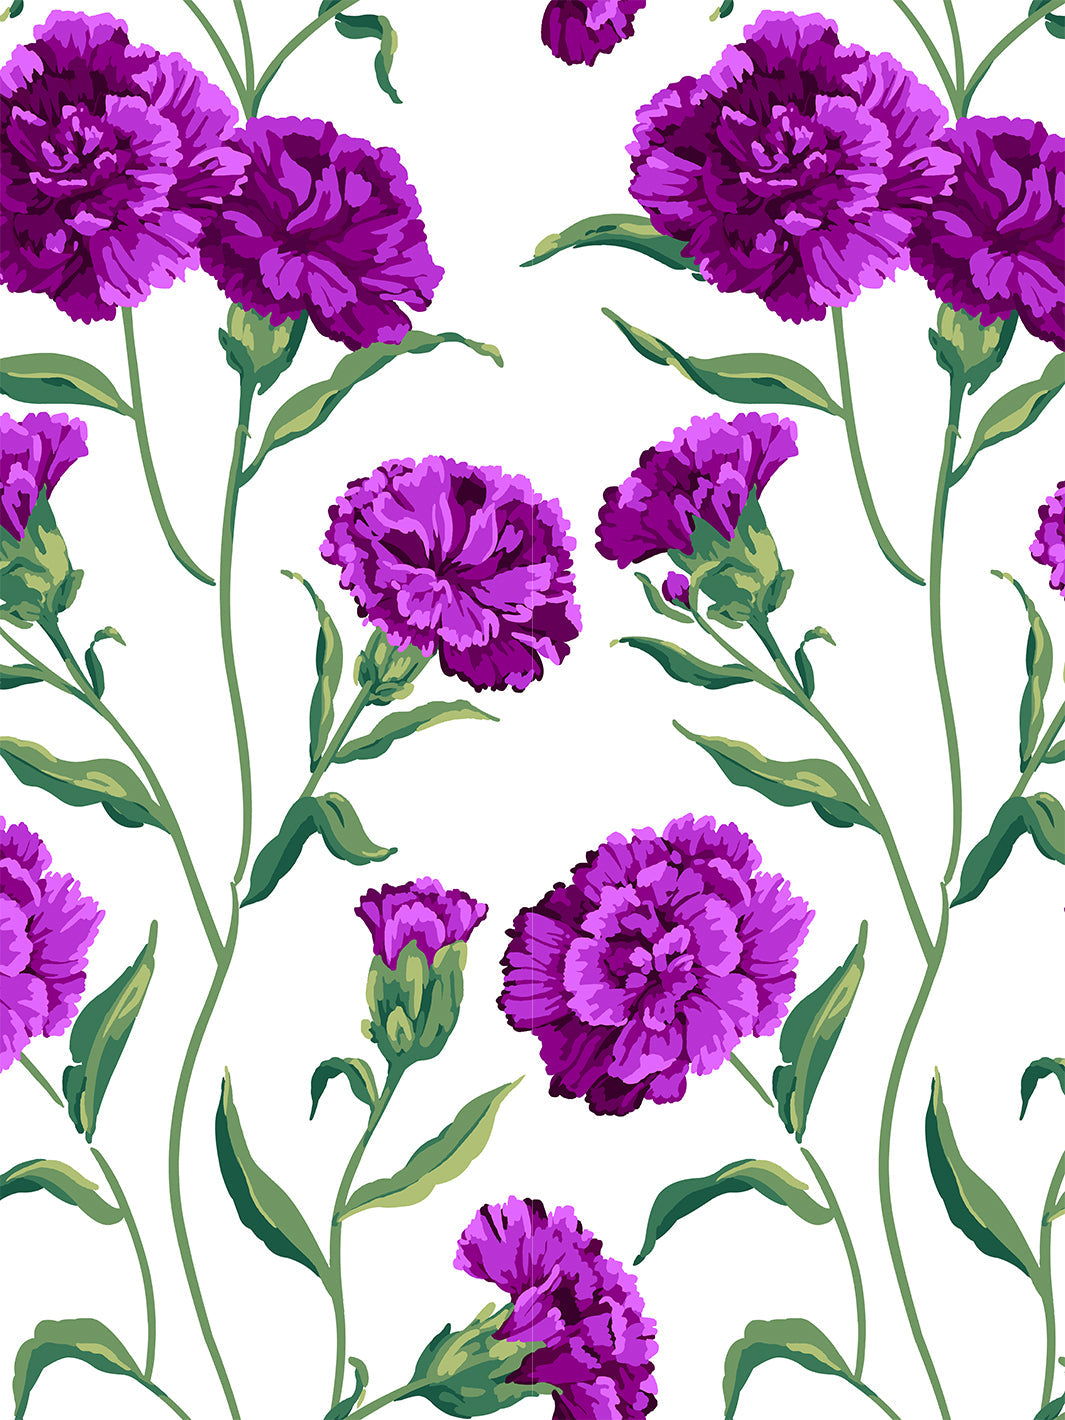 'Townhouse' Wallpaper by Sarah Jessica Parker - Concord